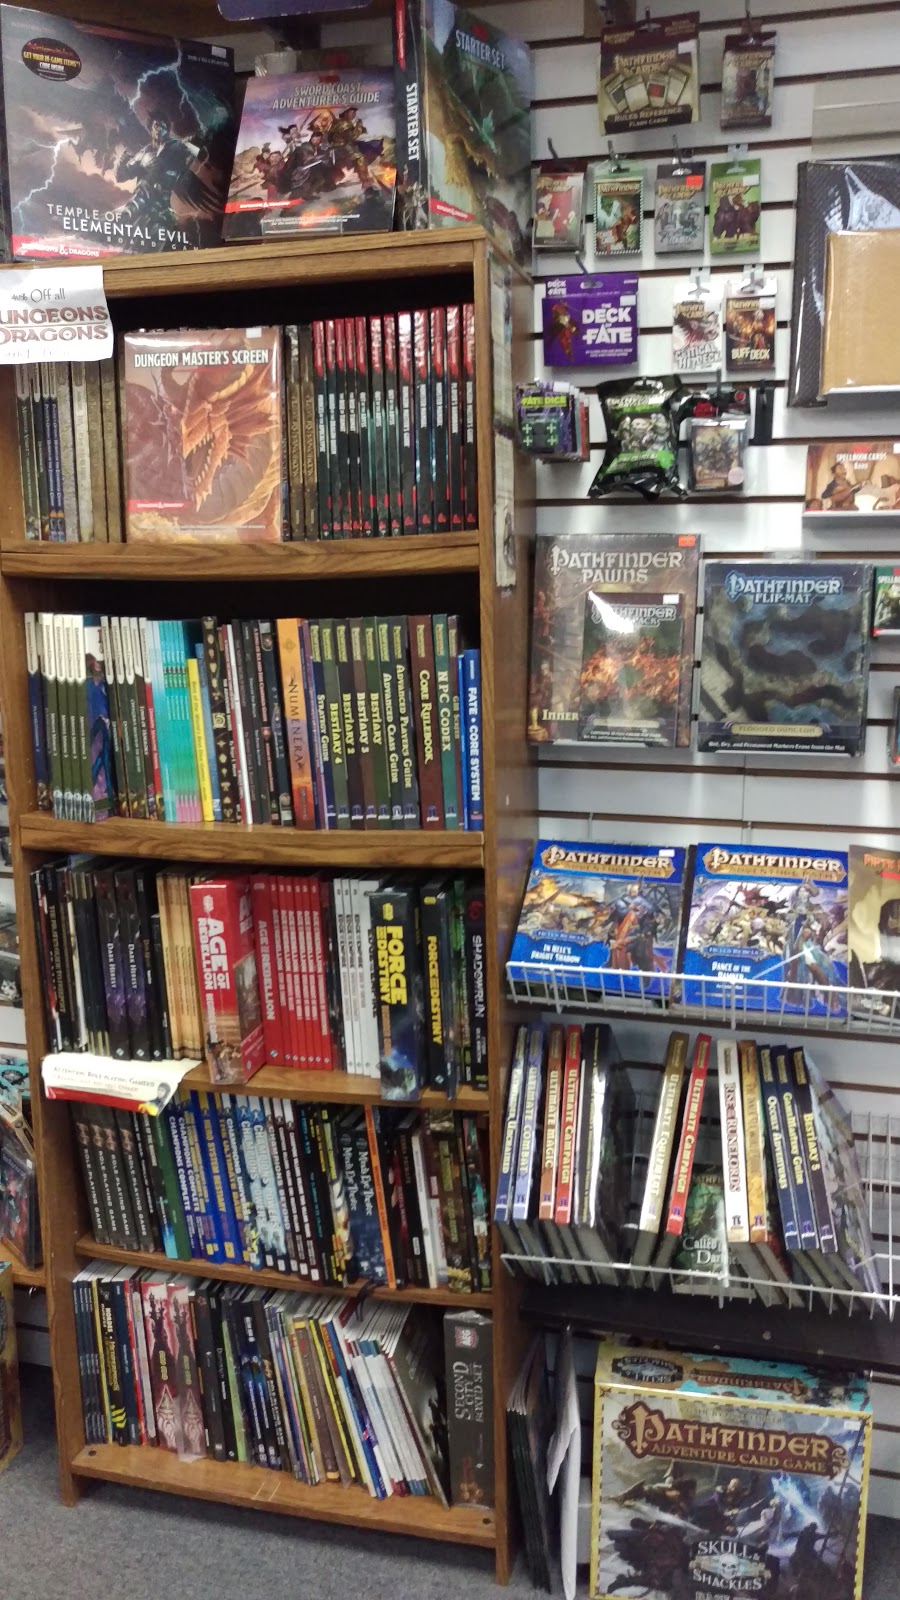 Checkmate Games and Hobbies | 6725 Central Ave, Toledo, OH 43617, USA | Phone: (419) 720-6901